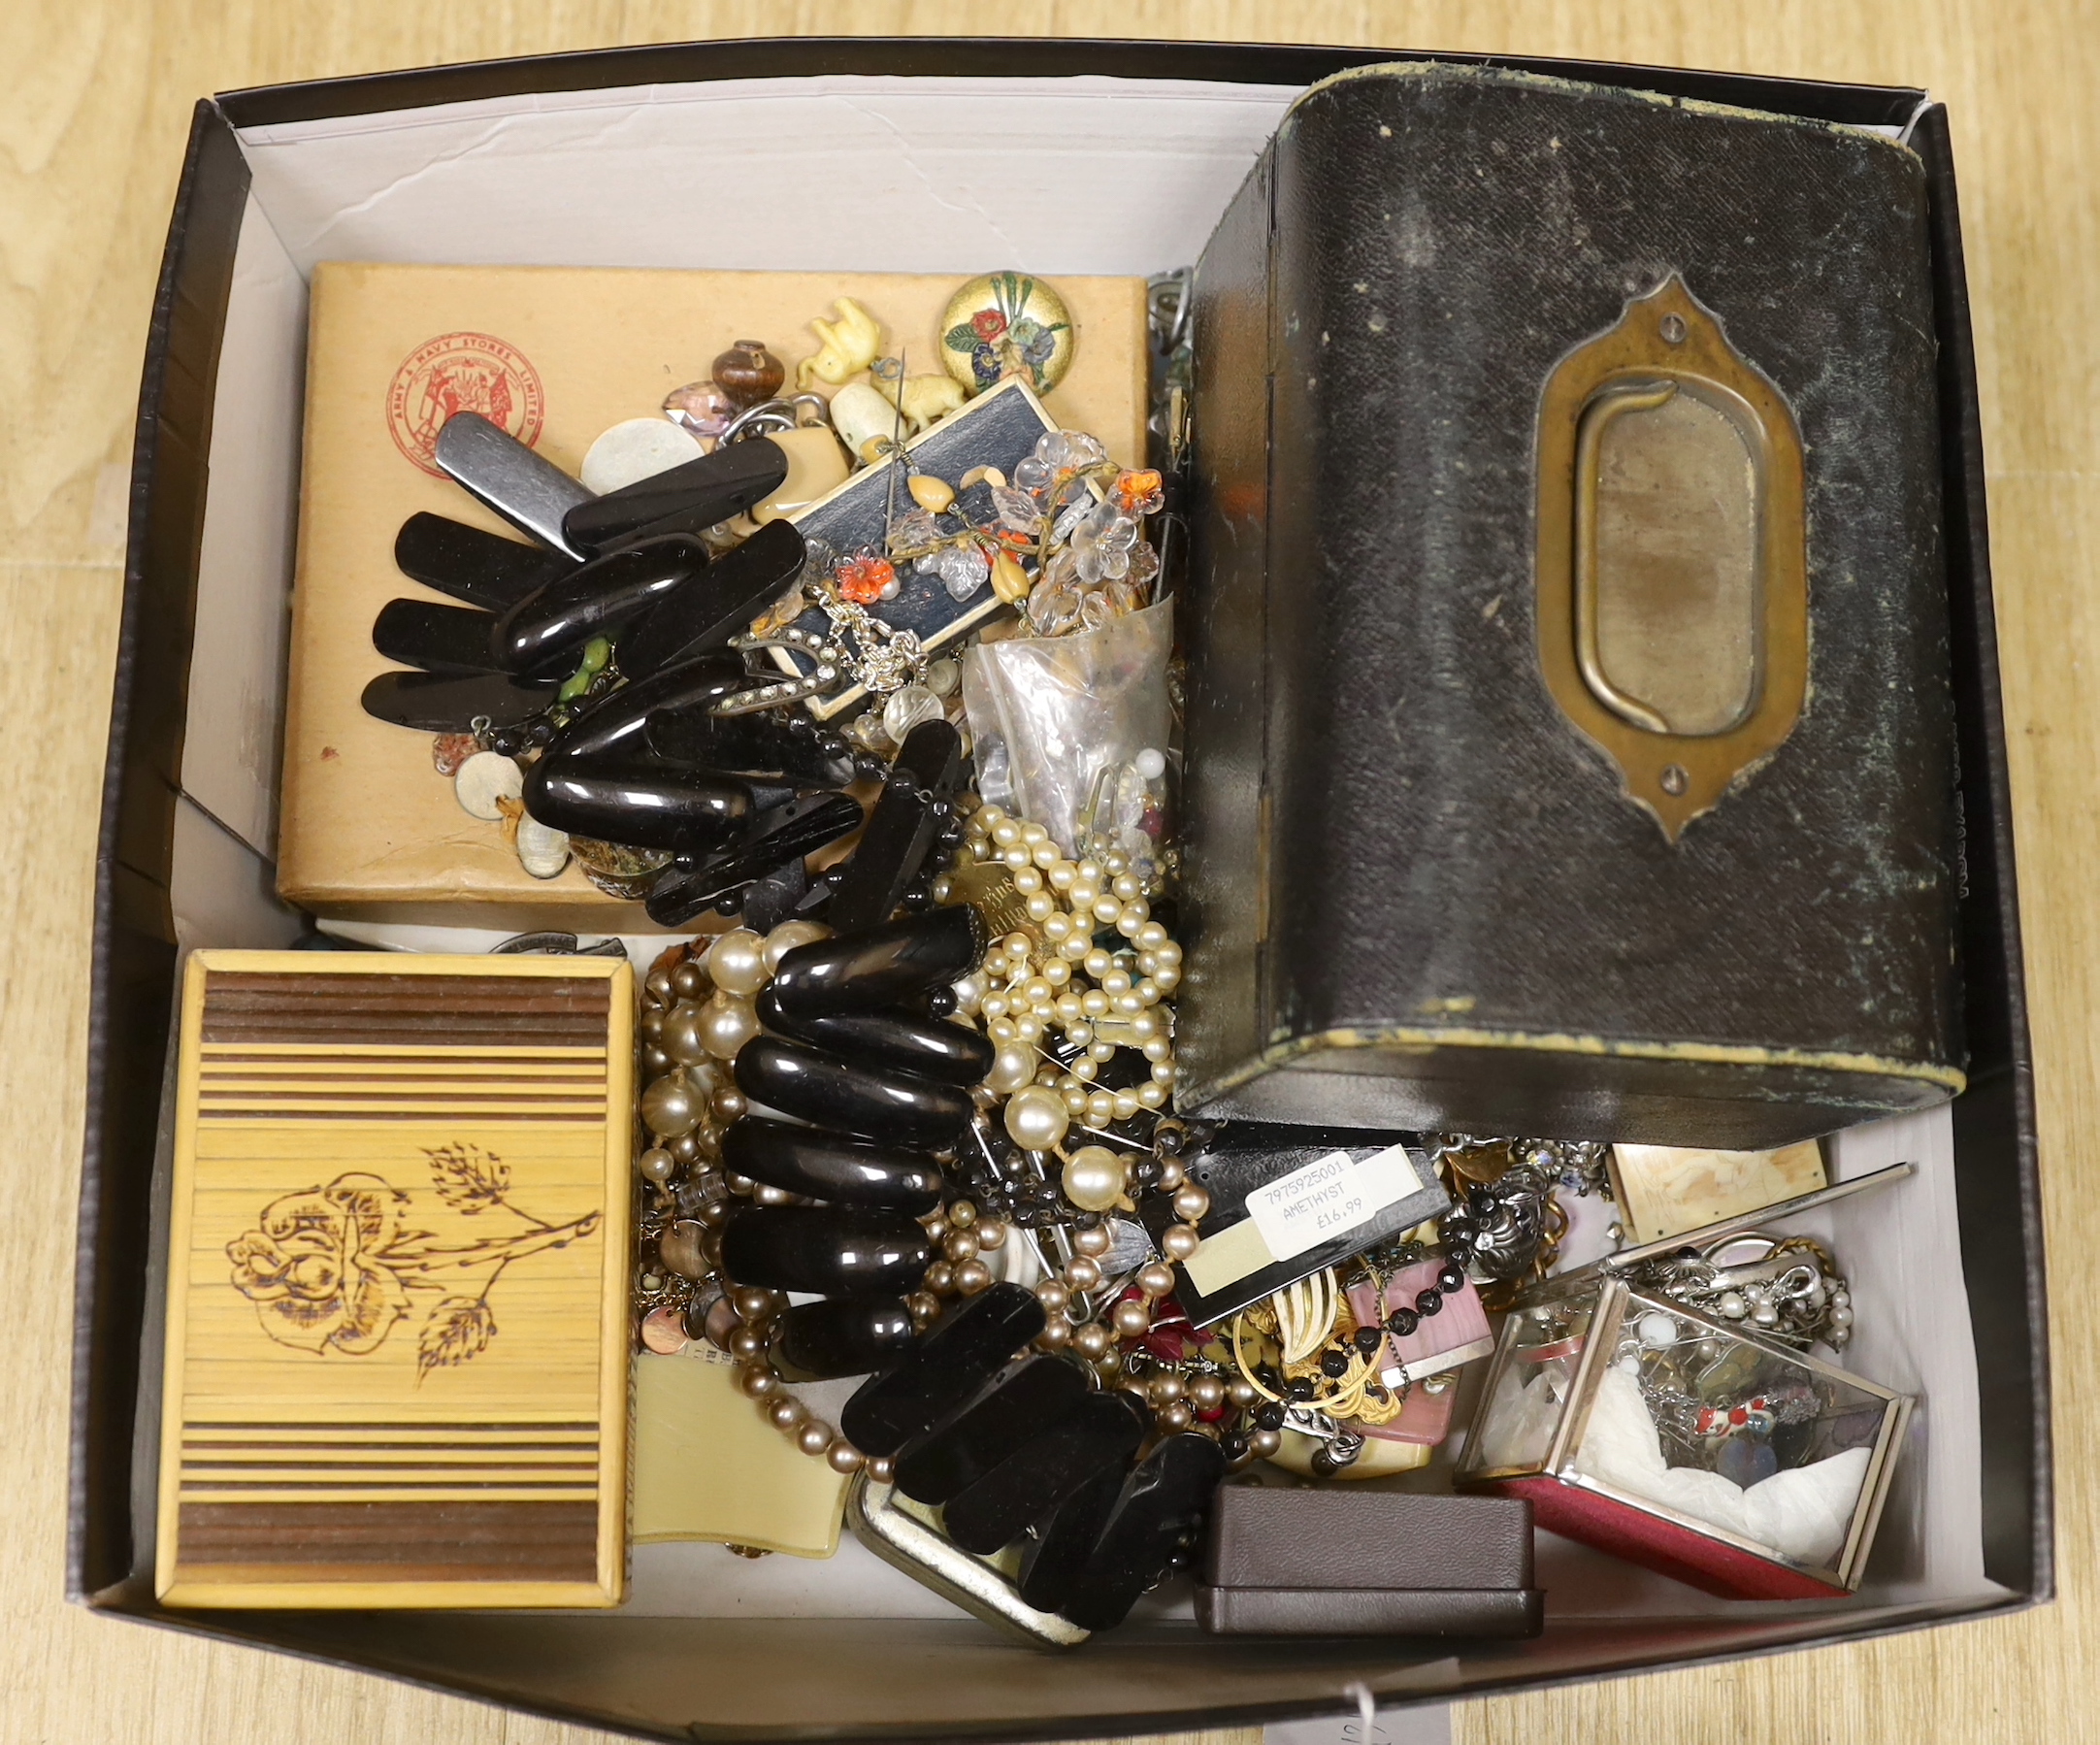 A quantity of assorted costume jewellery.